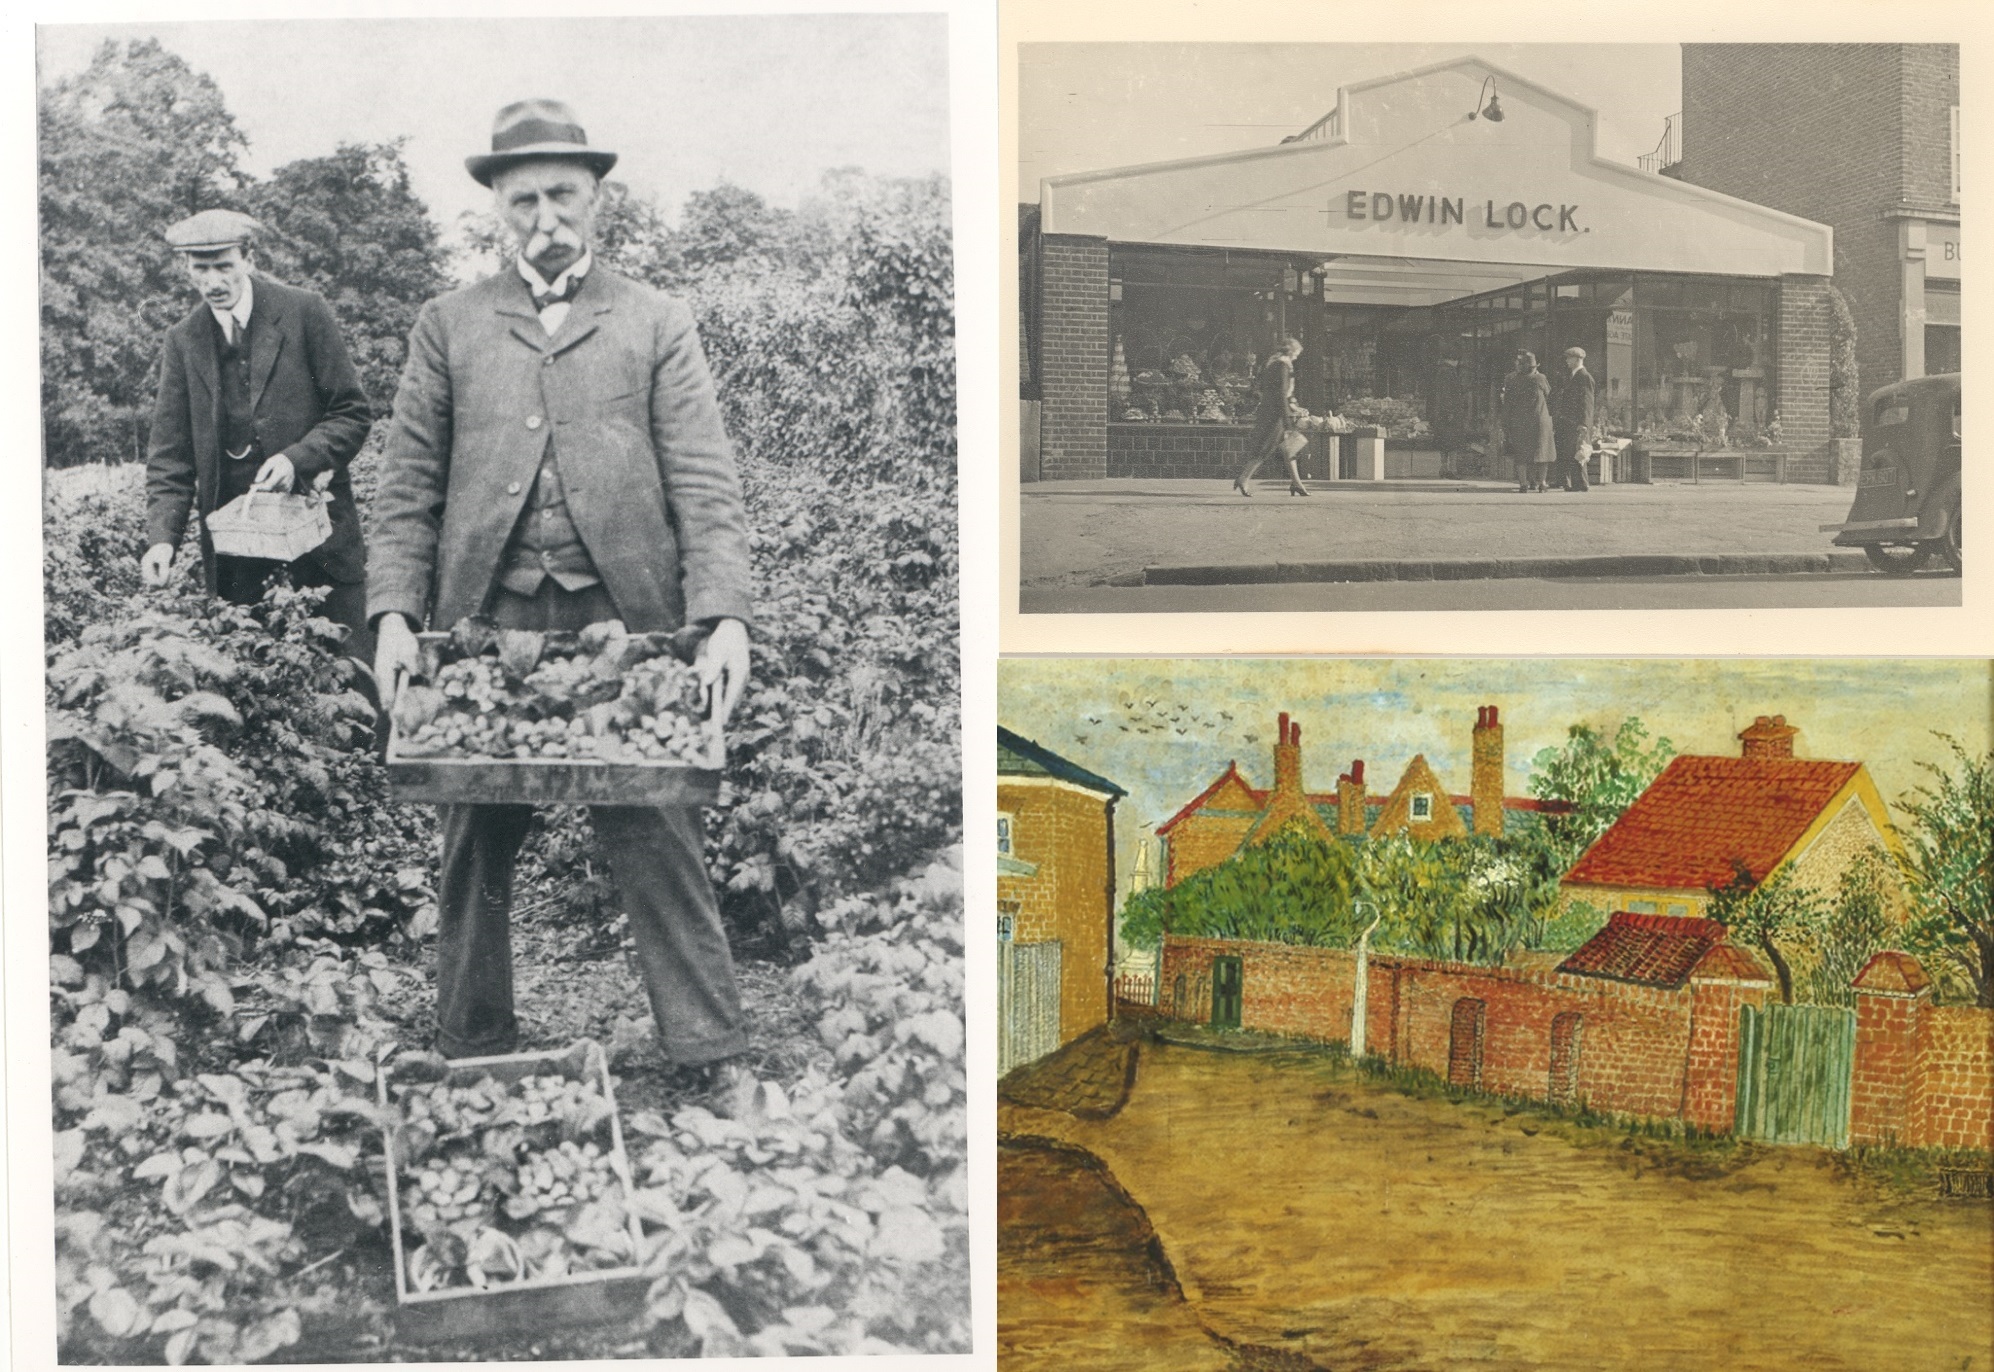 Photograph of Edwin Lock and his father Albert at the nursery, photograph of Edin's shop with people outside, Edwin's painting of Springfield Lane